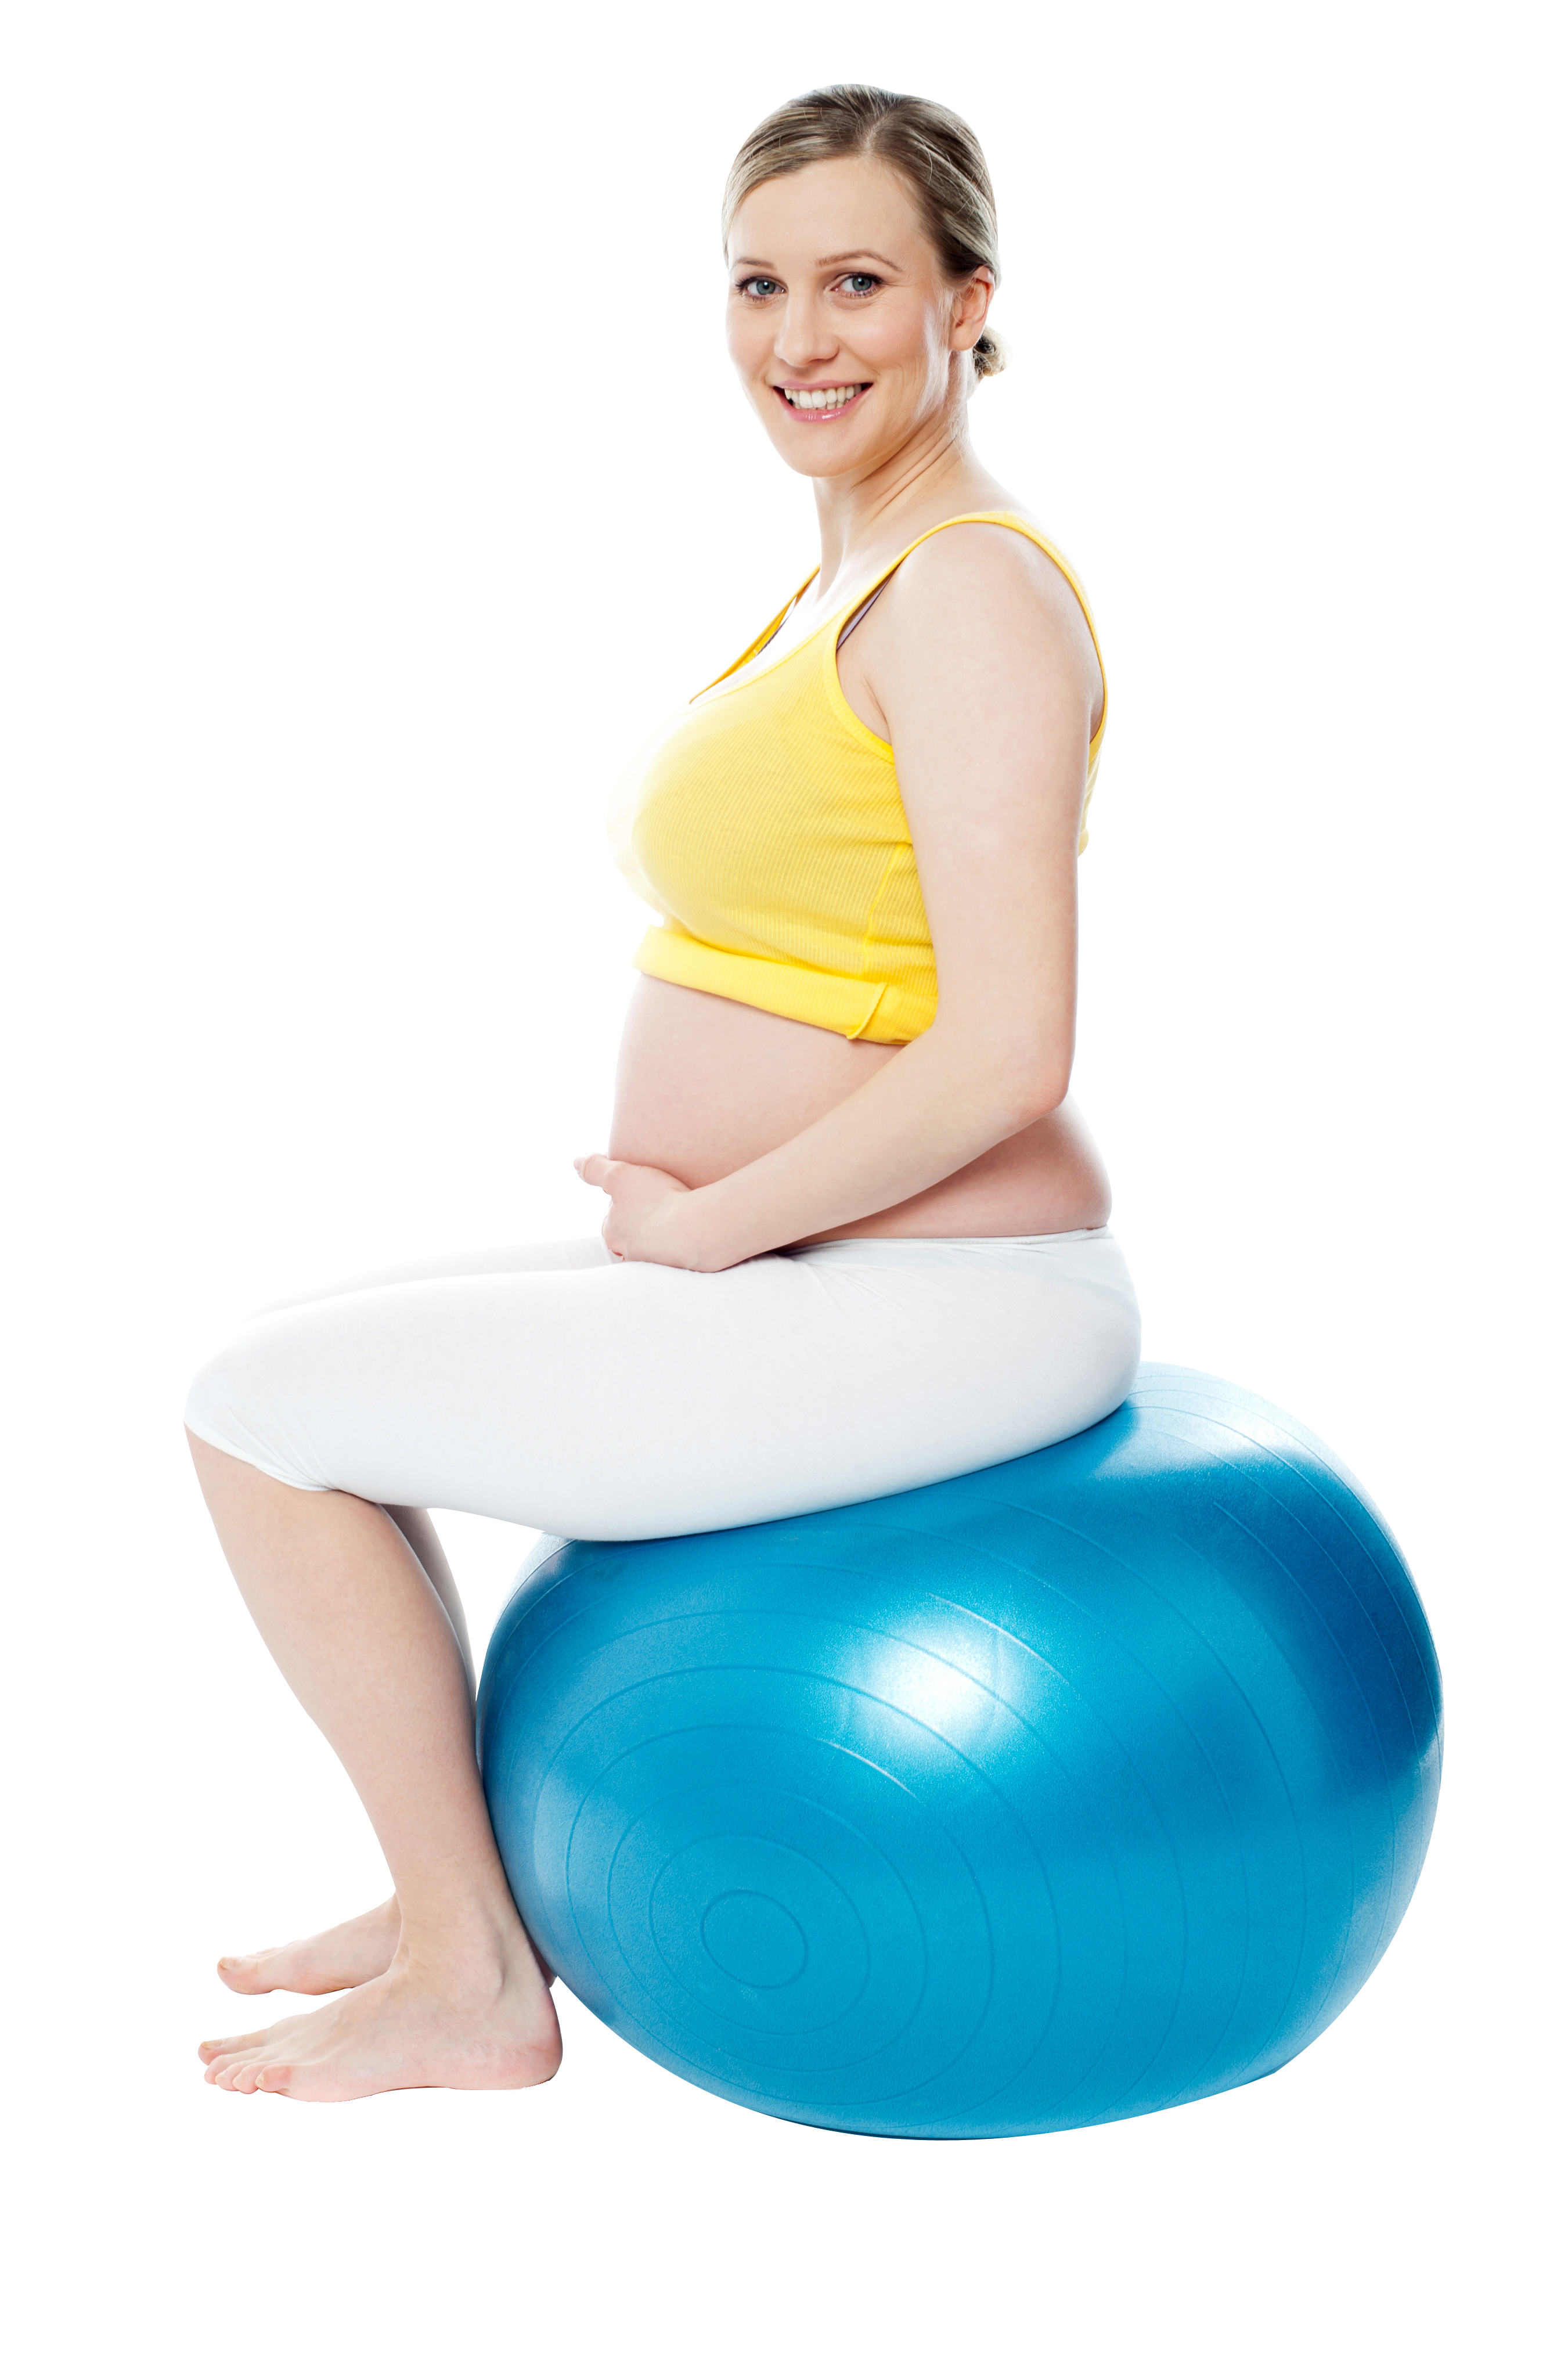 Pregnant Woman Exercise PNG Image